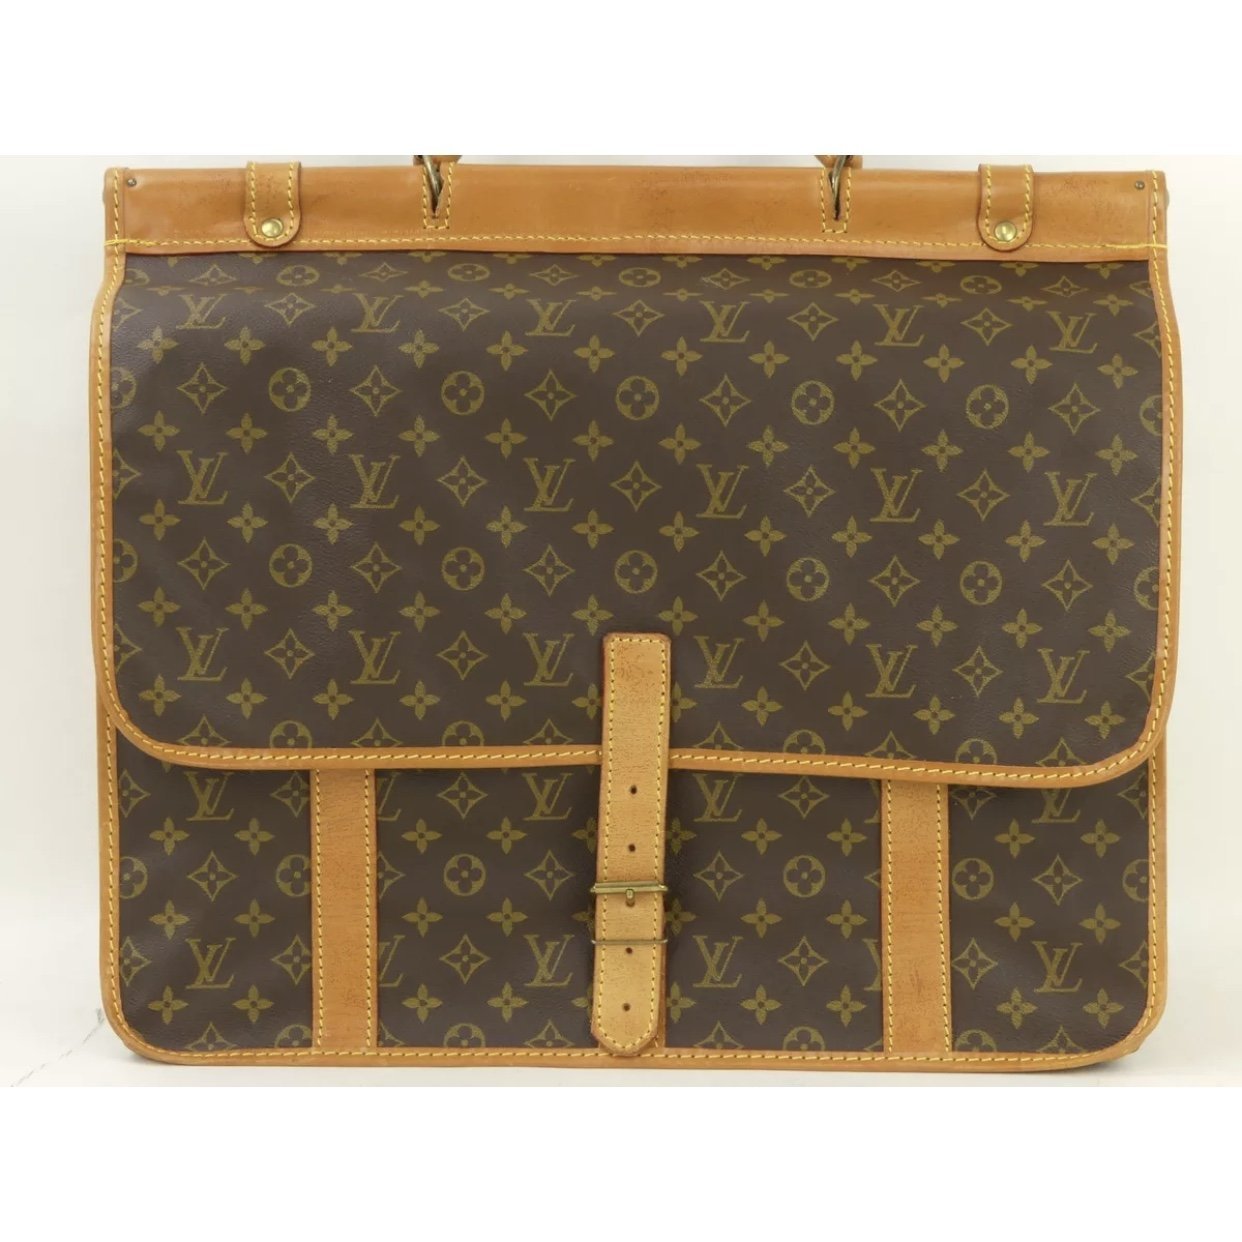 Louis Vuitton, Bags, Authentic Lv Sac Chasse Travel Bag